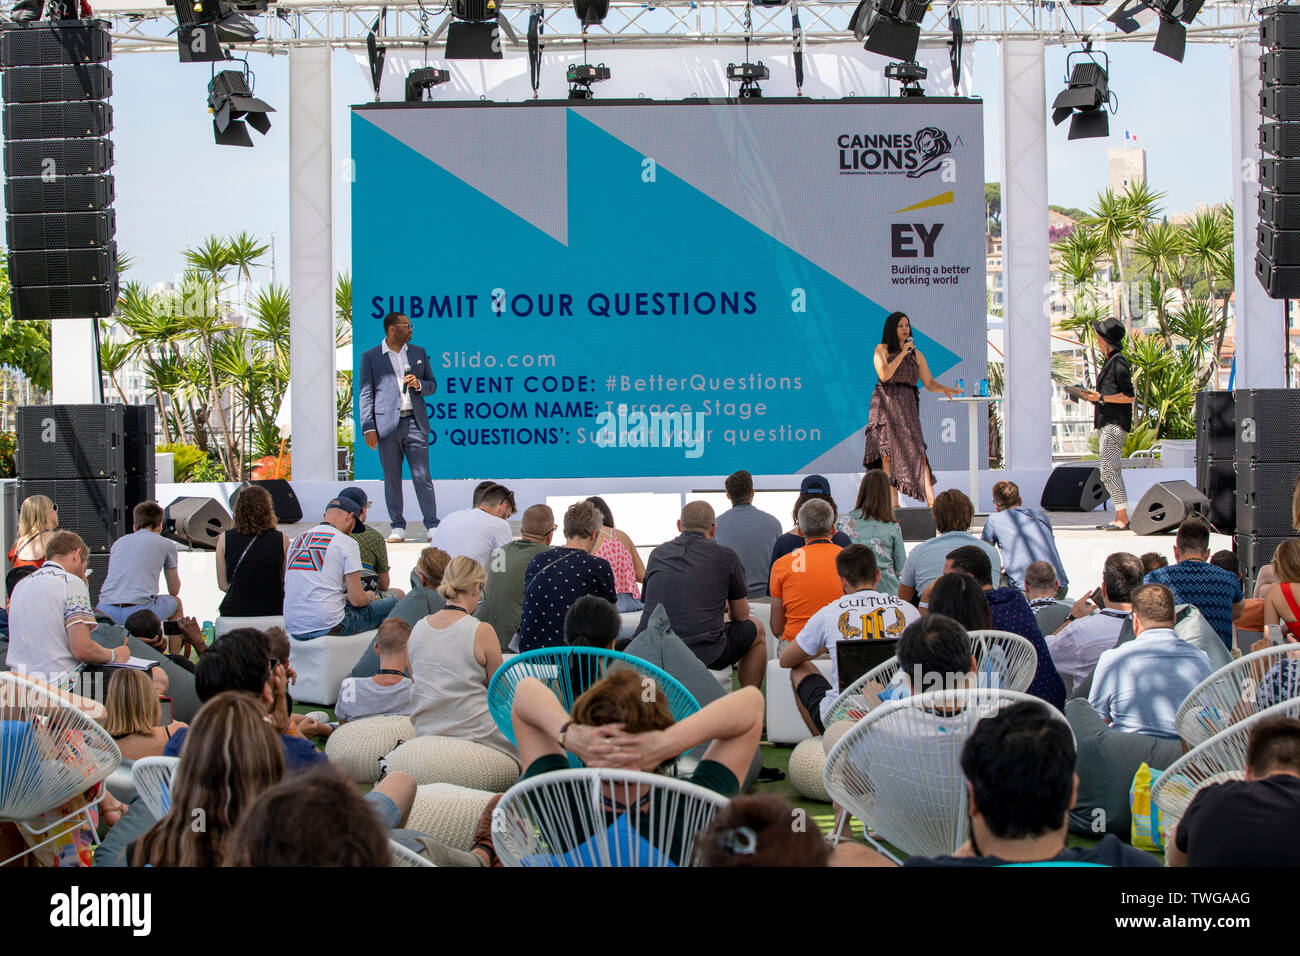 Cannes, France, 20 June 2019, Chief Marketing Officer Activision Blizzard Esports Leagues Daniel Cherry and Head of Call of Duty Esports for Activision Blizzard Johanna Faries speaks on stage during the Activision